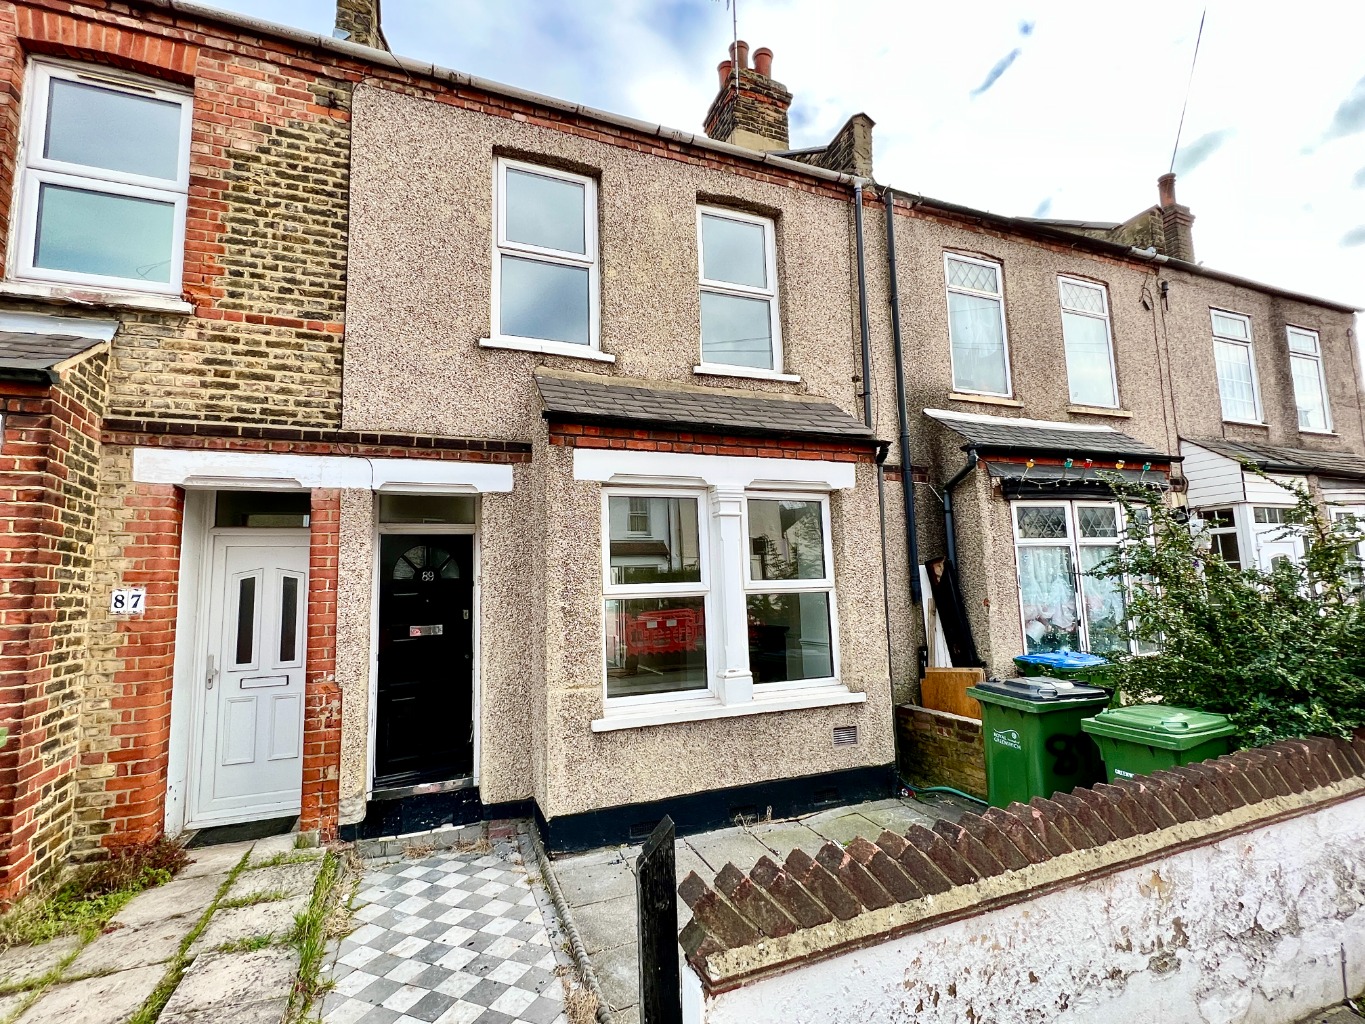 Beaumont Gibbs are offering for sale this three bedroomed Victorian terrace house for sale in Swingate lane Plumstead. Offered with immediate vacant possession, we hold keys for viewings.